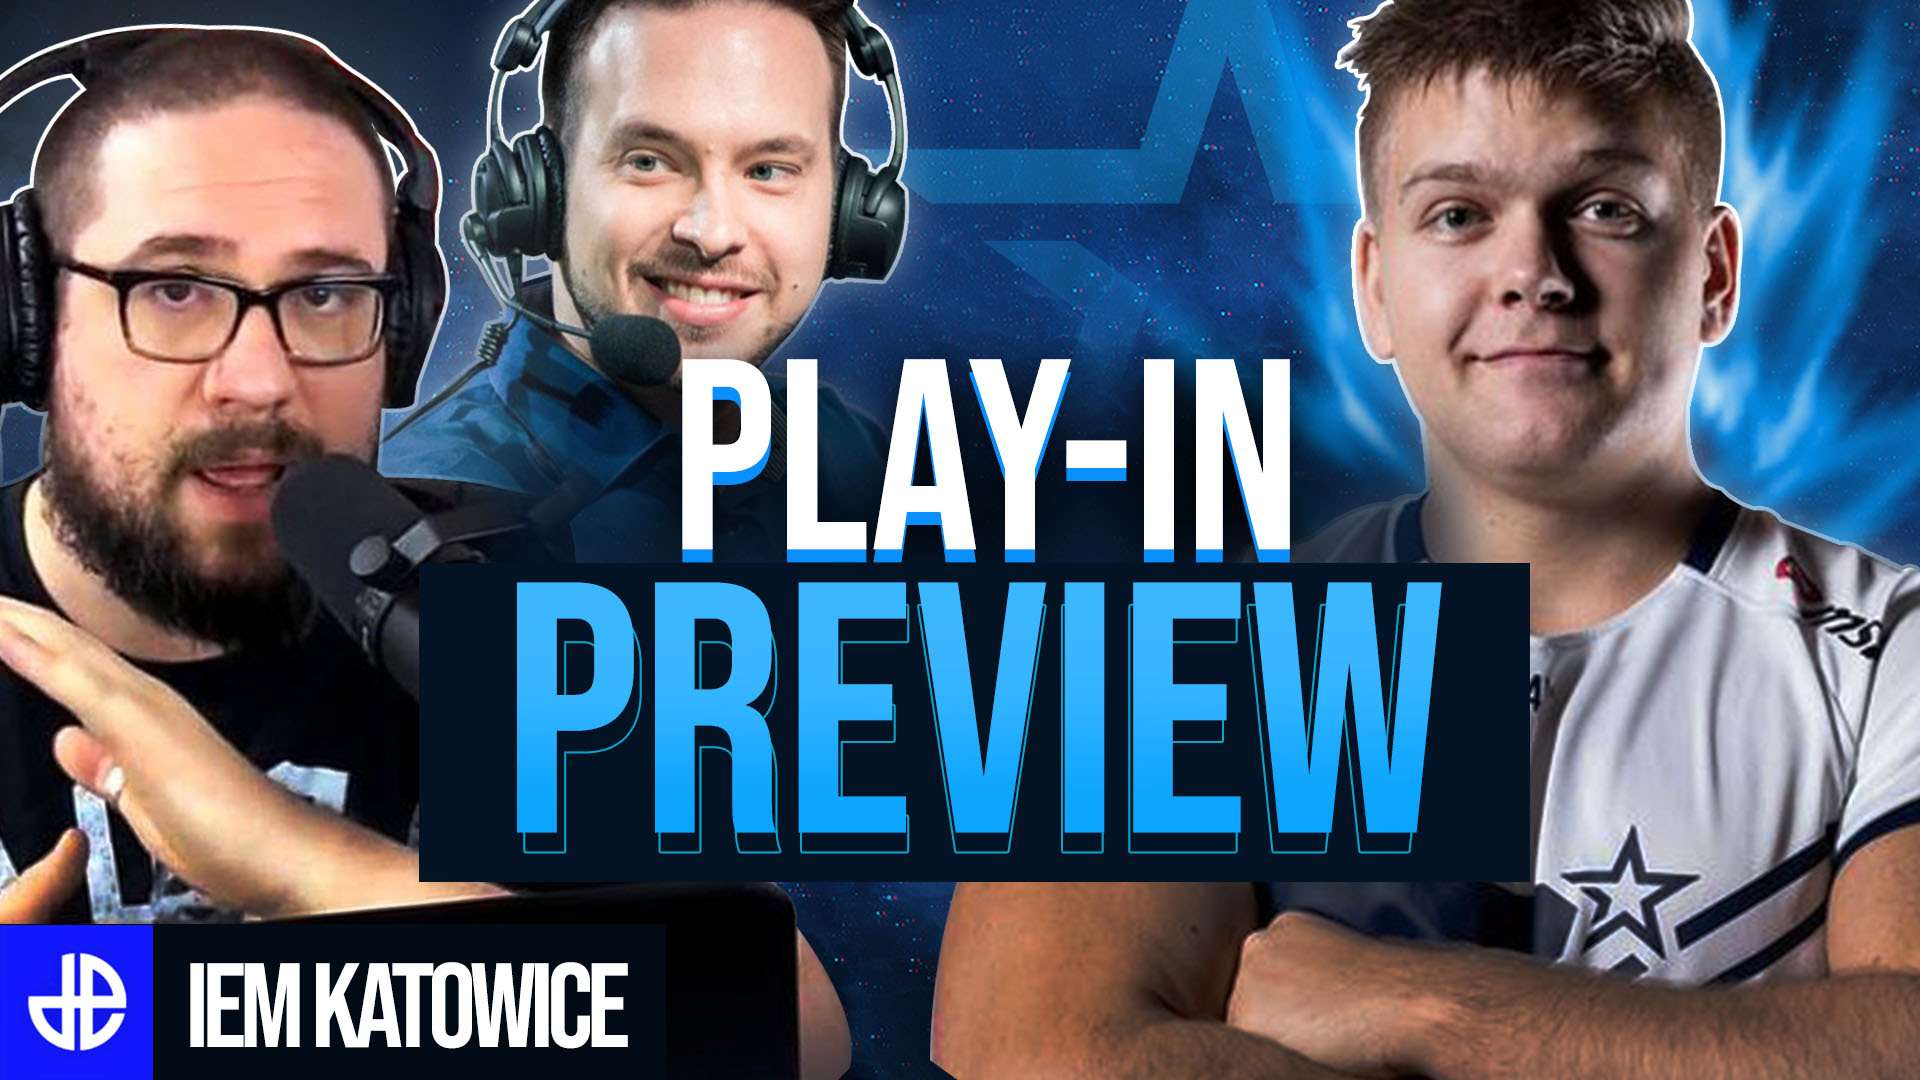 IEM Katowice Play In Preview with Richard Lewis, Maniac